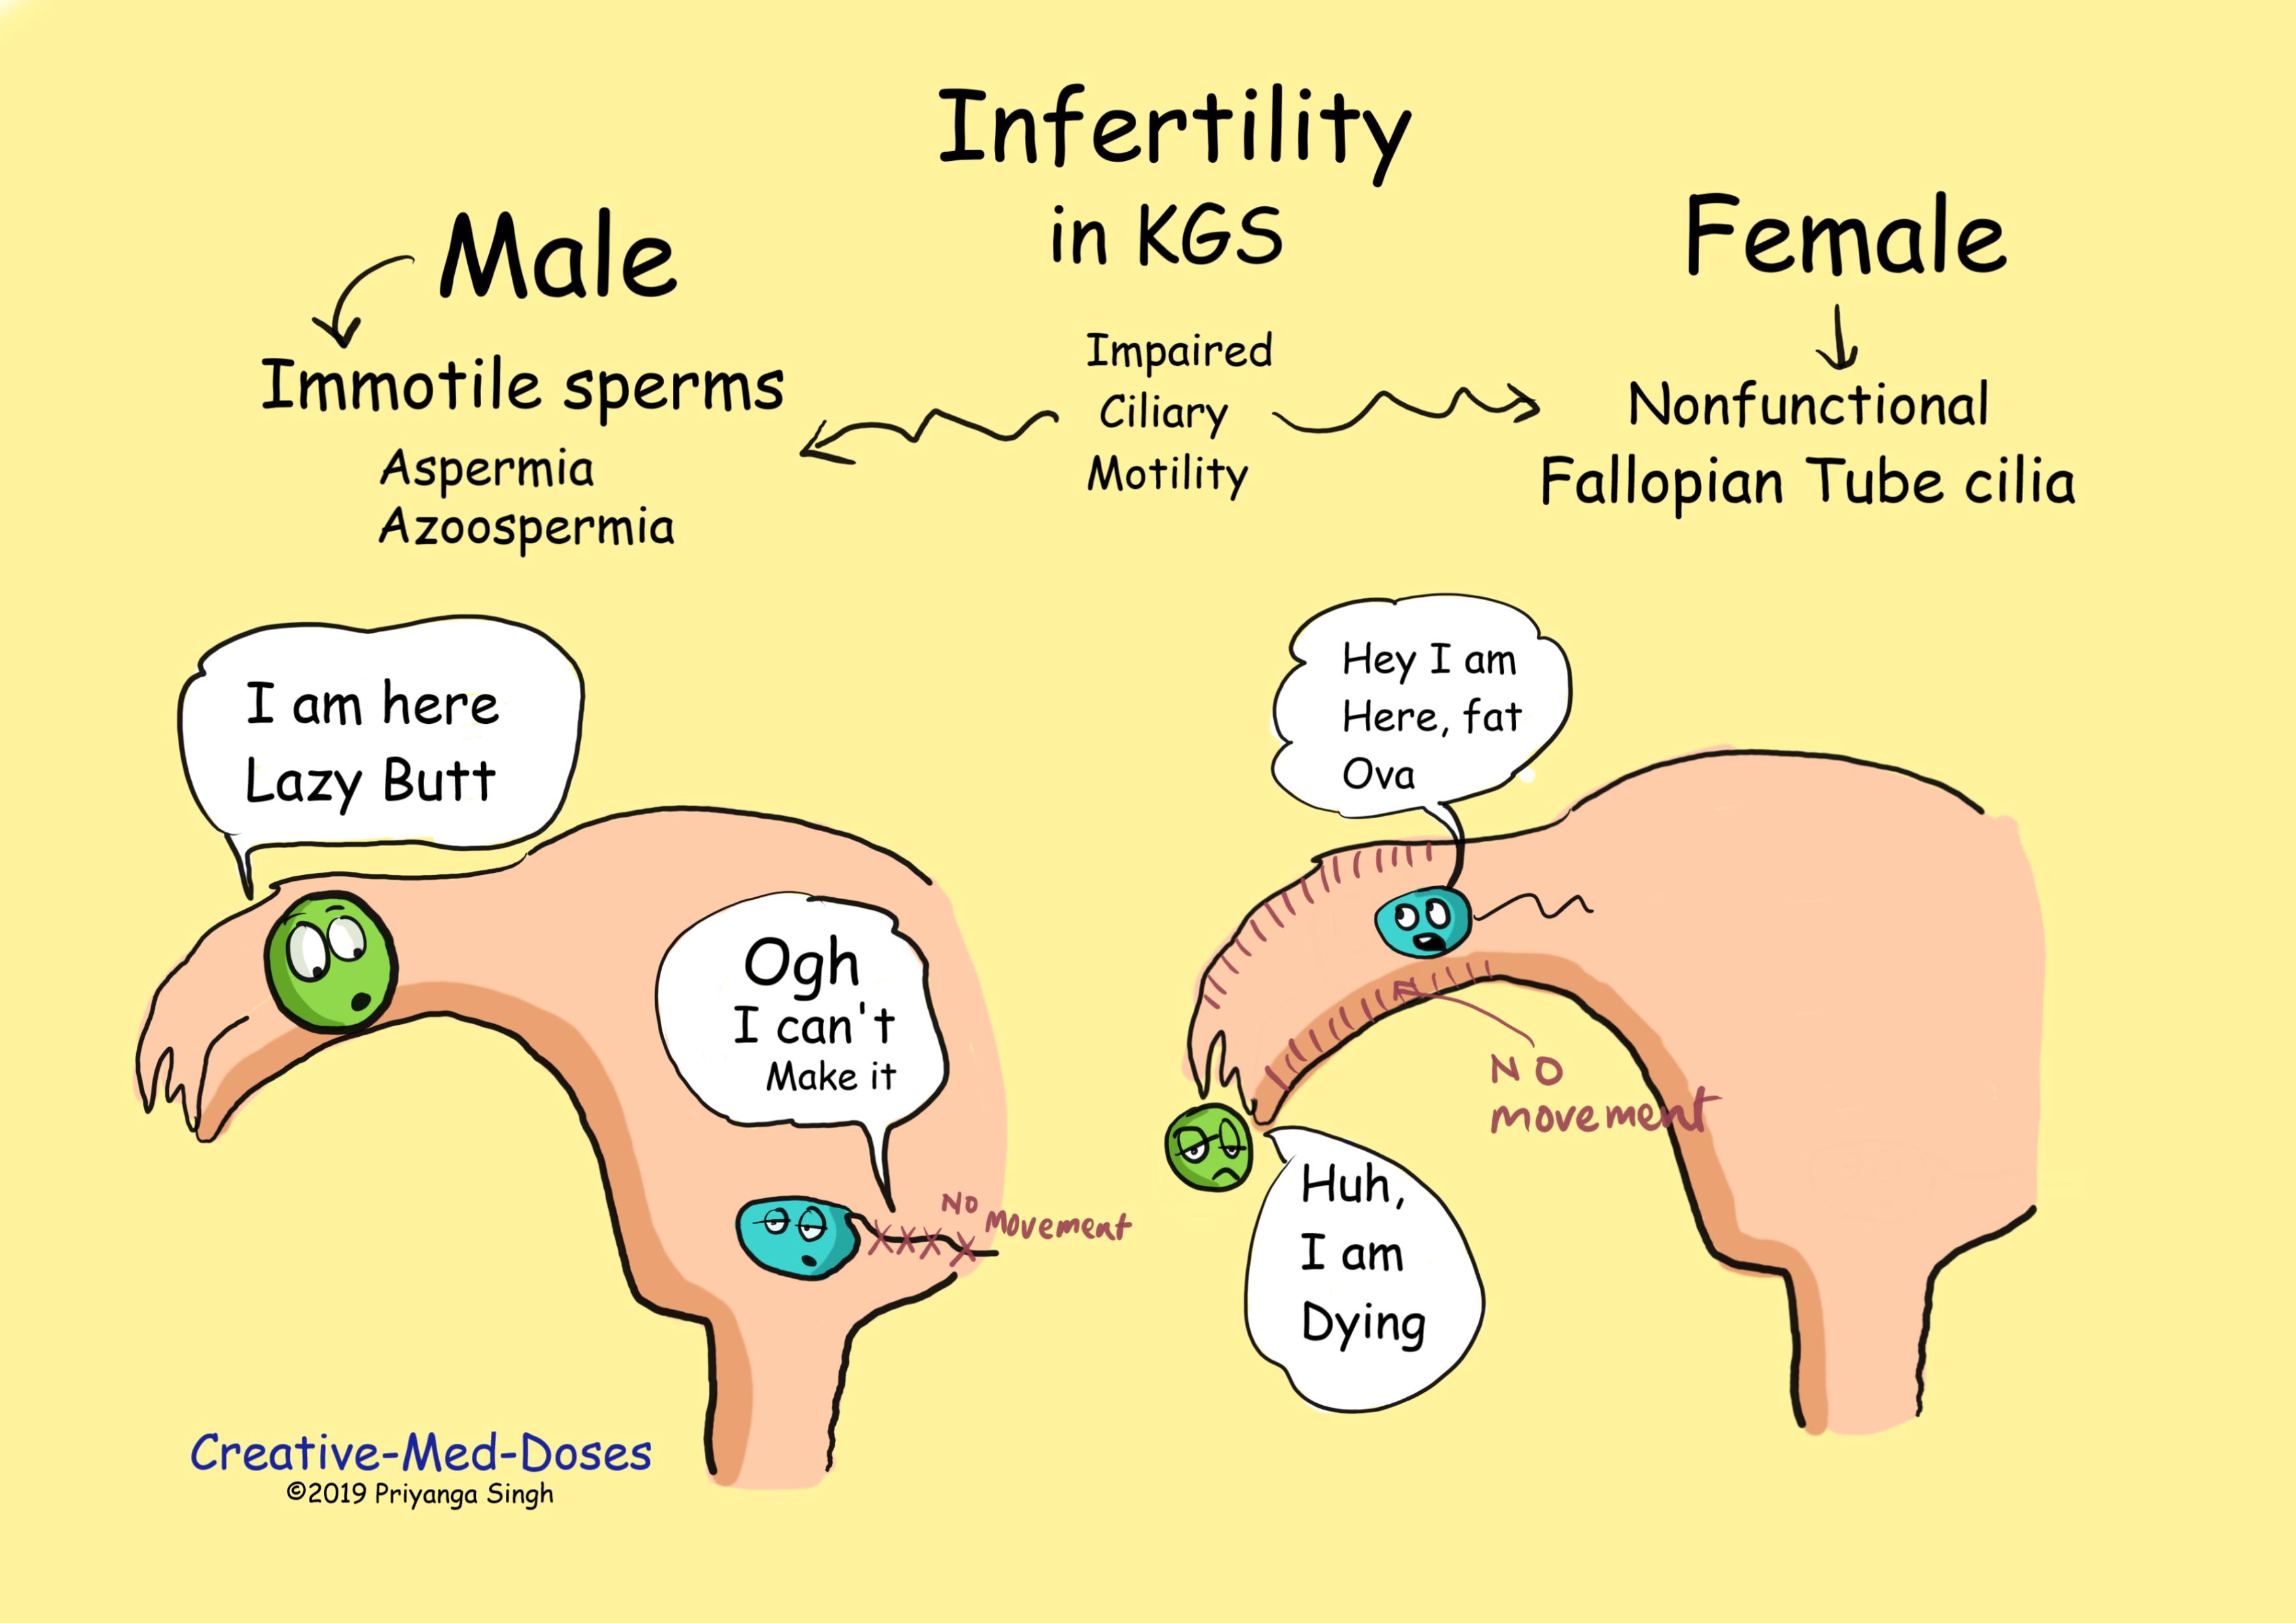 Pathogenesis of Male and female infertility in kartagener syndrome 